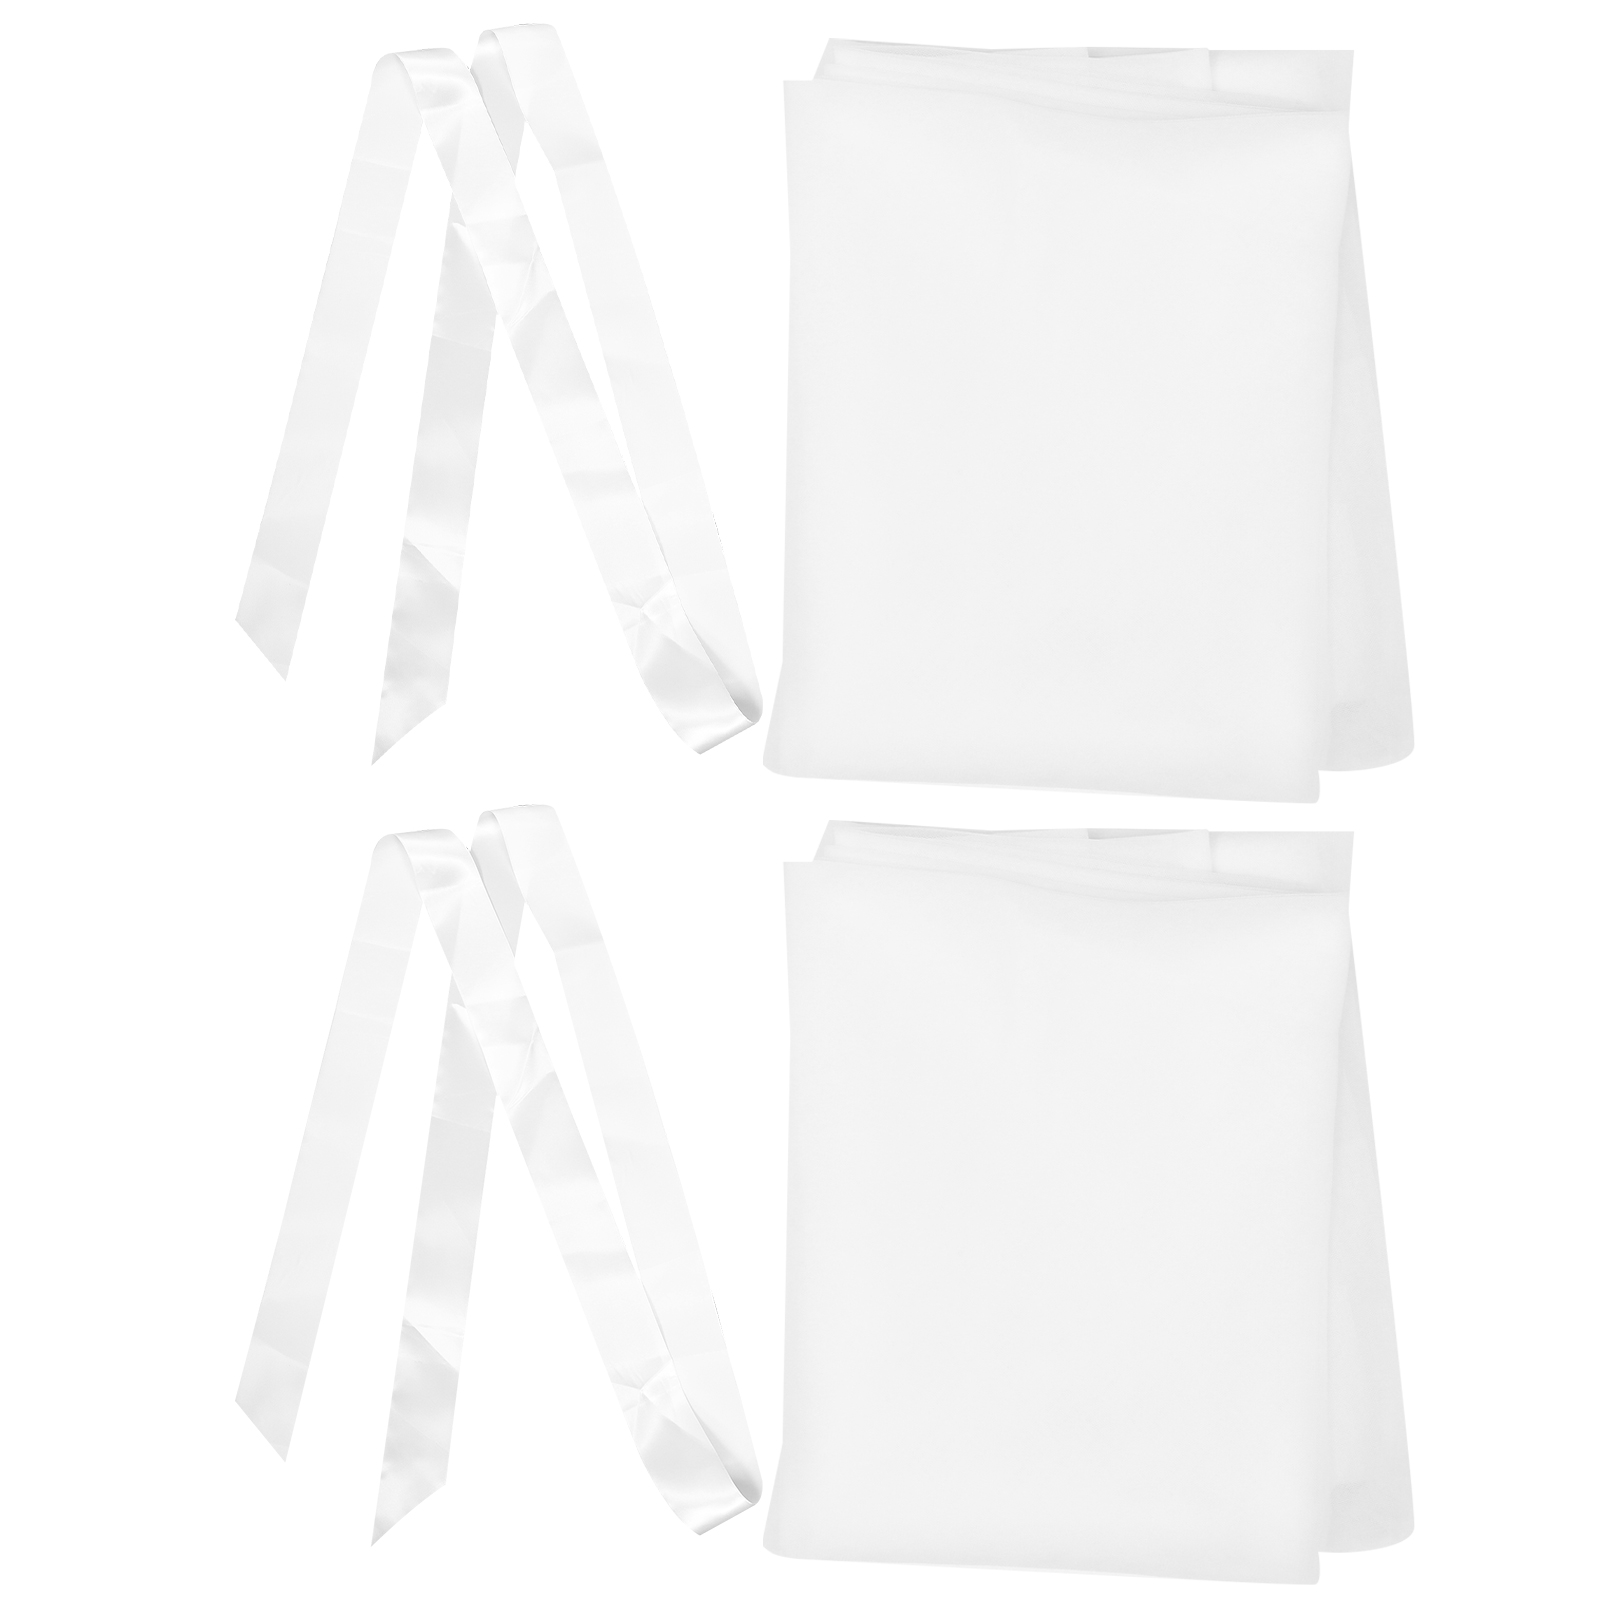 2 Pcs Tulle Chair Cover Long Bow Ties Mesh Fluffy Tutu Chair Skirt Slipcovers for Bridal Shower Wedding Baby Shower Decor (White) - image 2 of 8